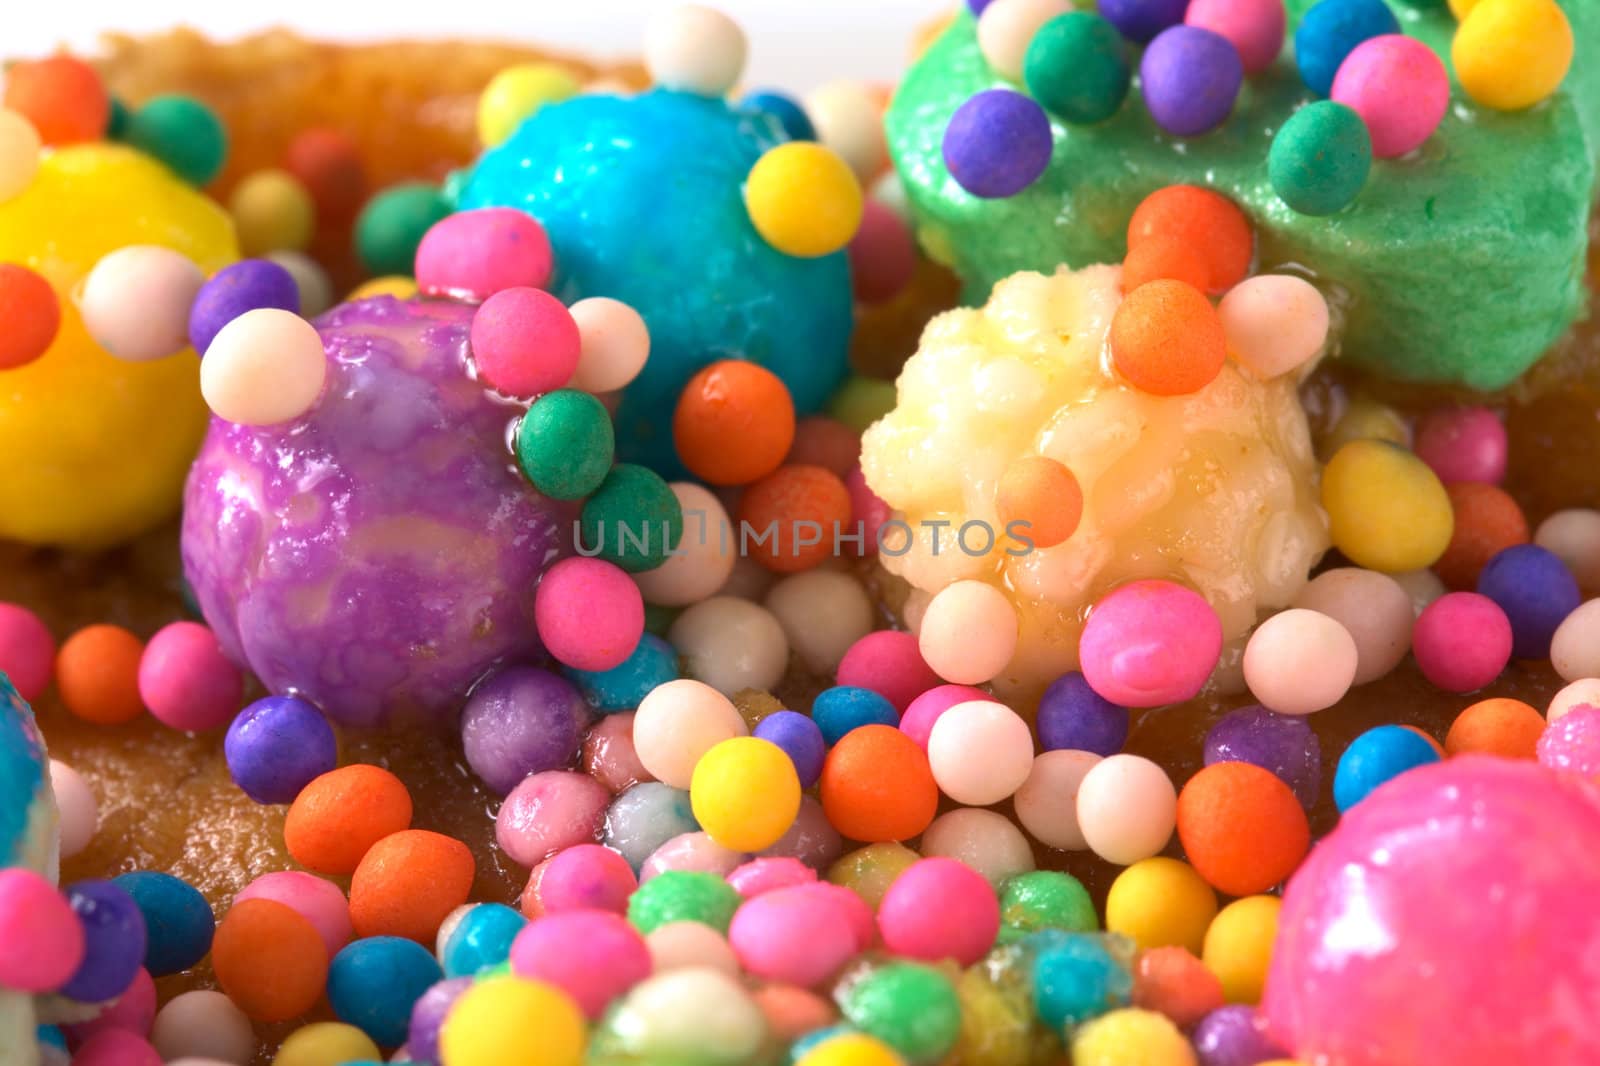 Colorful sweet candy balls garnishing the Peruvian cake called Turron (Selective Focus, Focus on the big light ball in the top right corner and several other small ones)